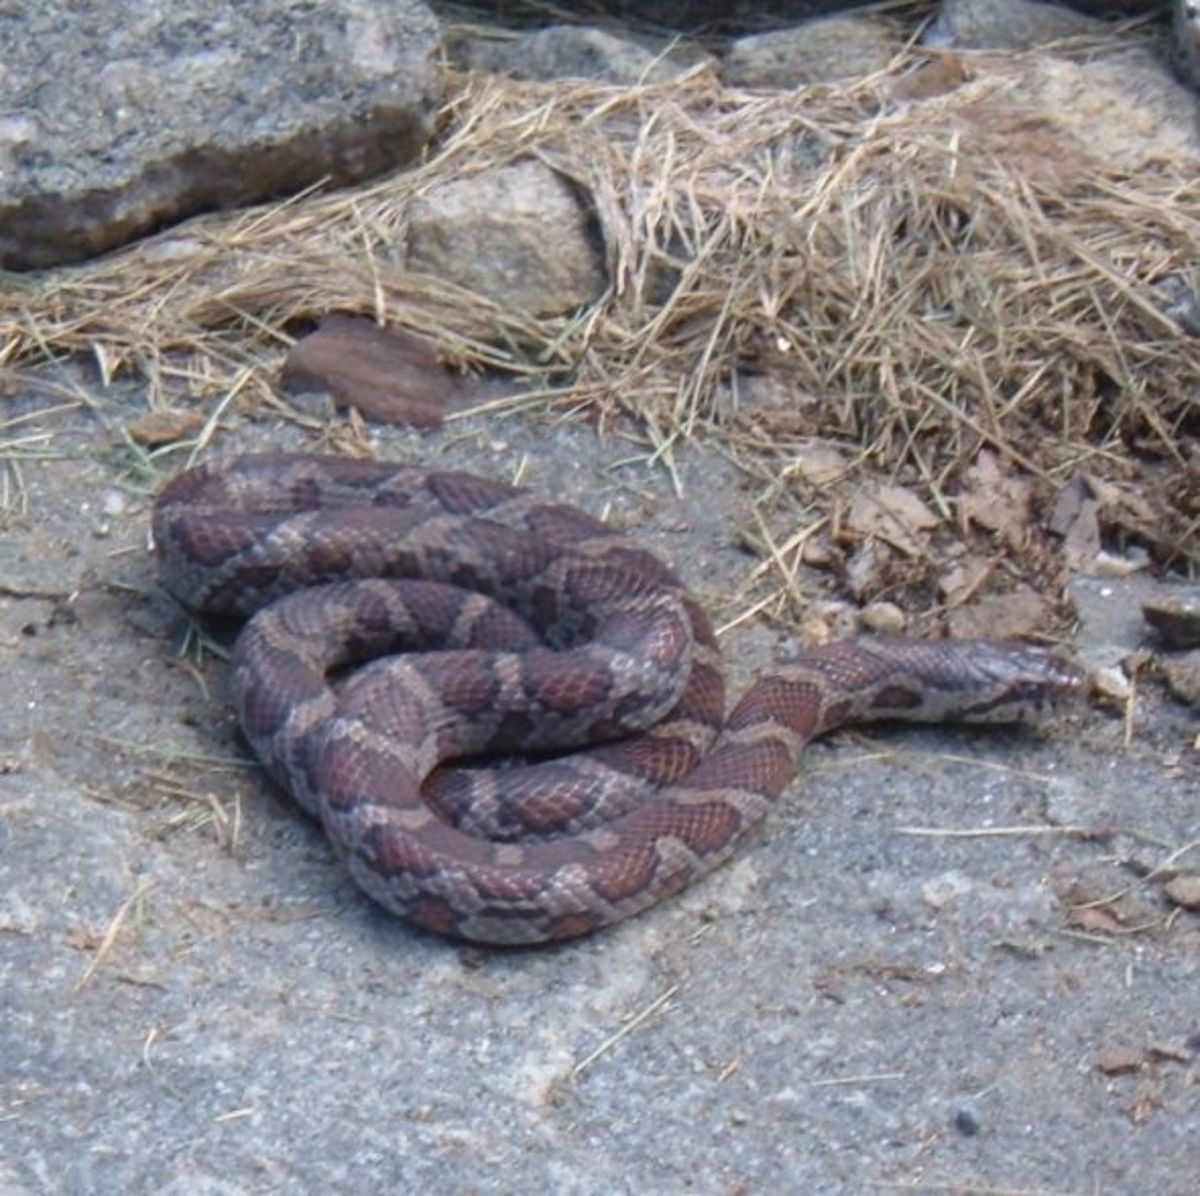 Can you identify this snake? 